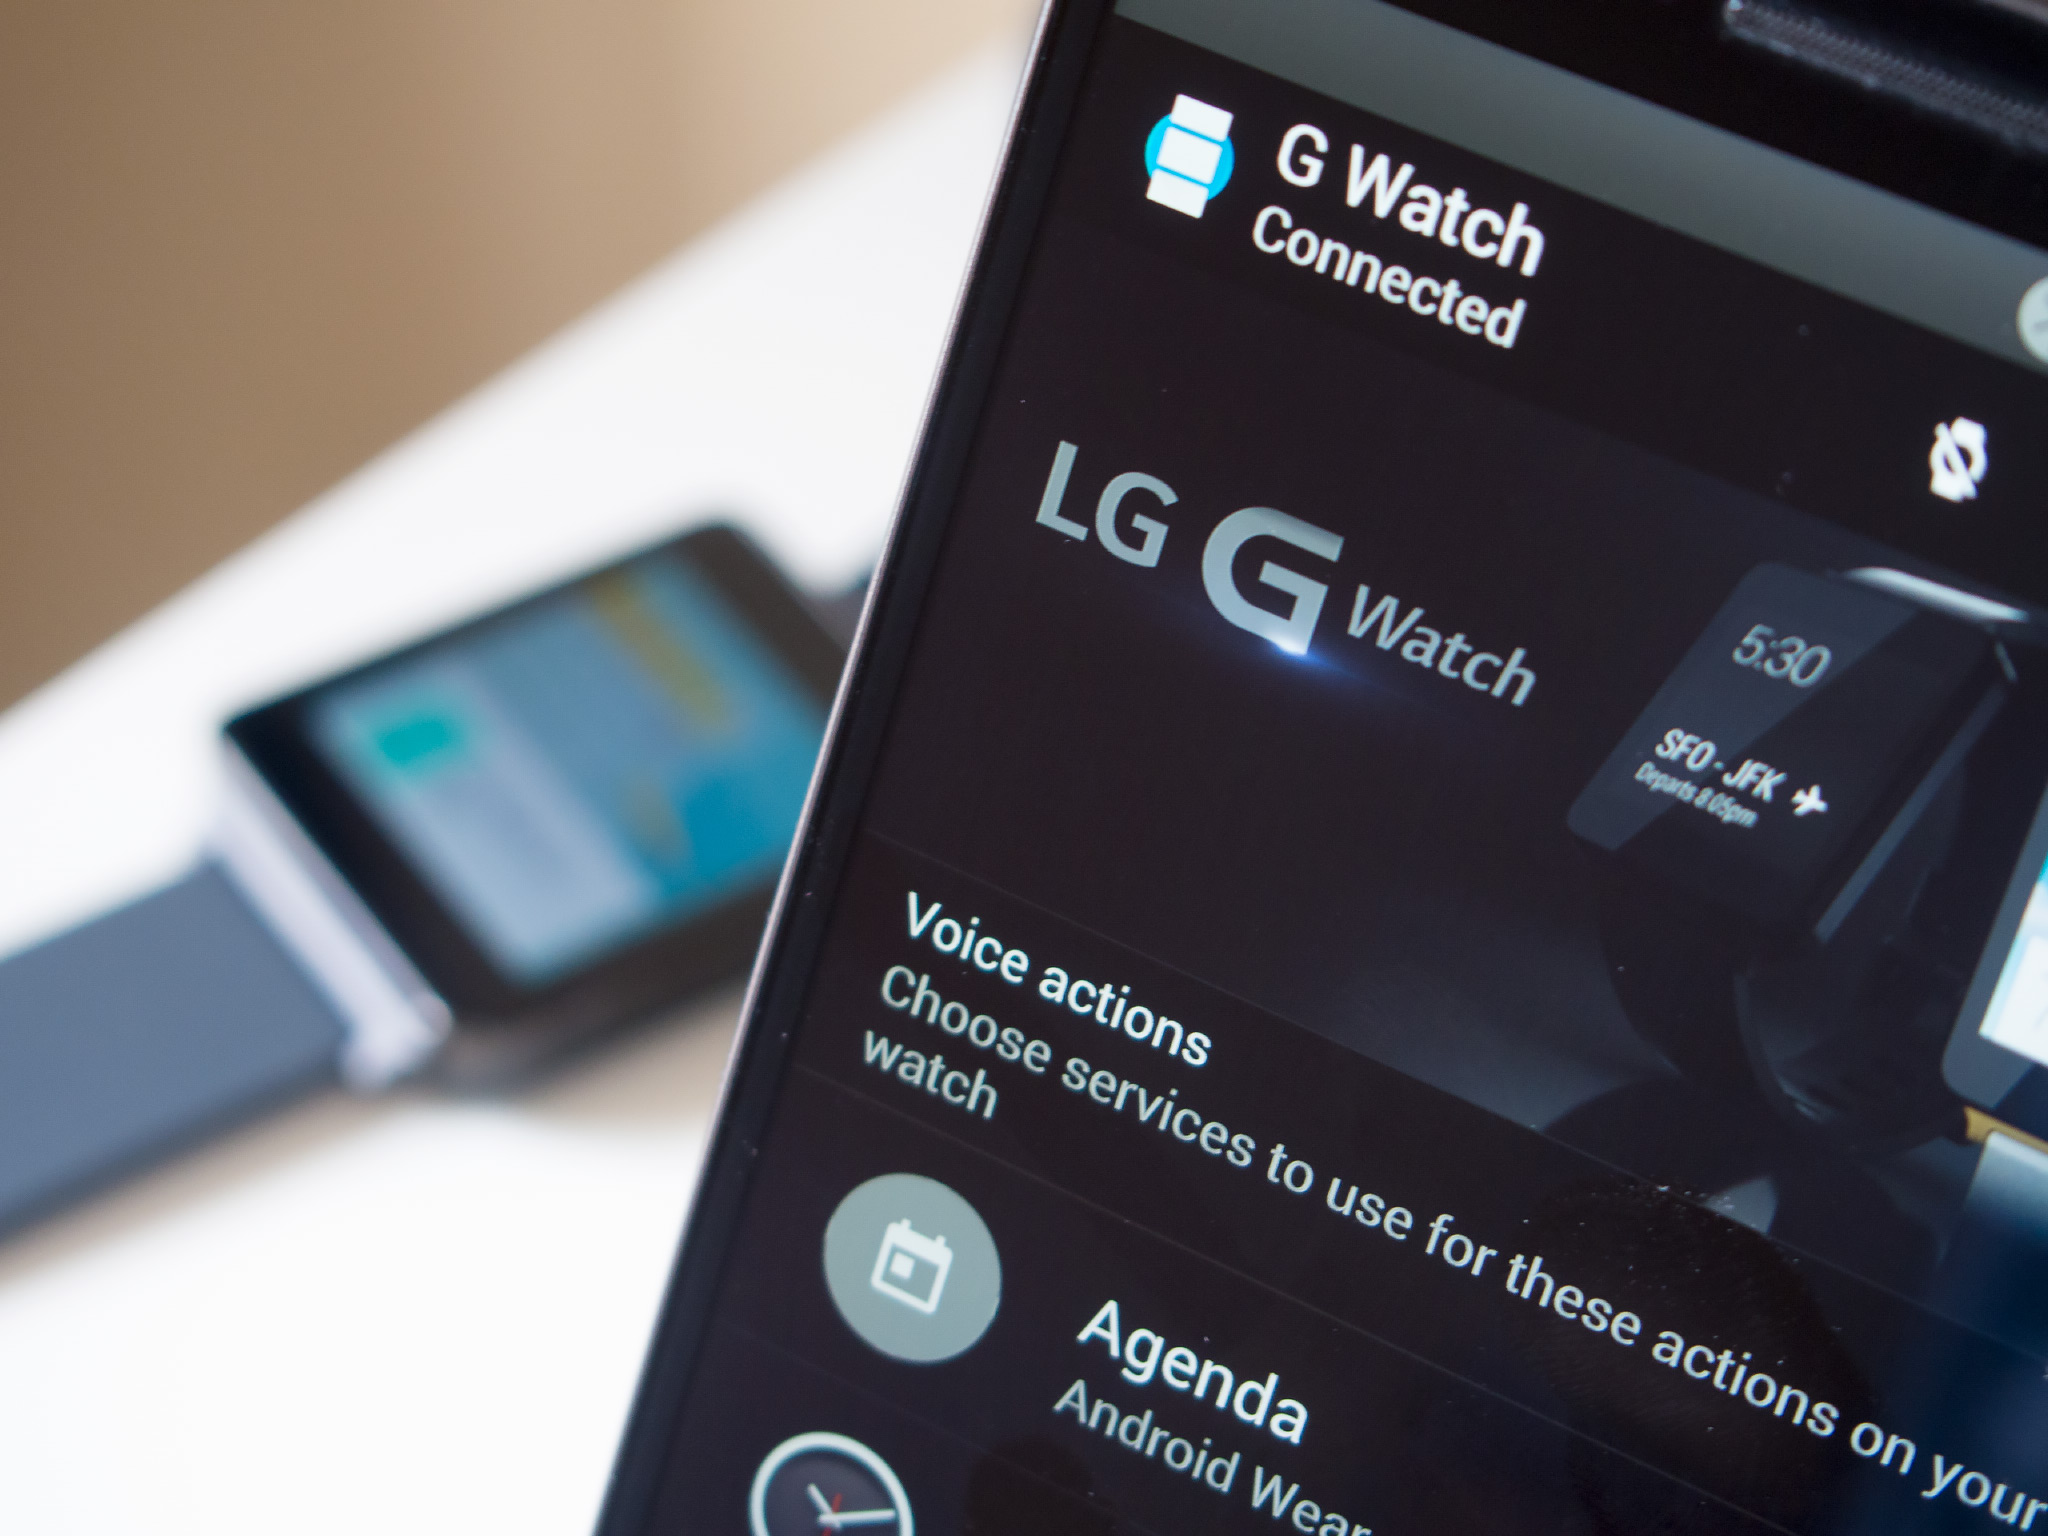 LG G Watch + LG G3, Android Wear